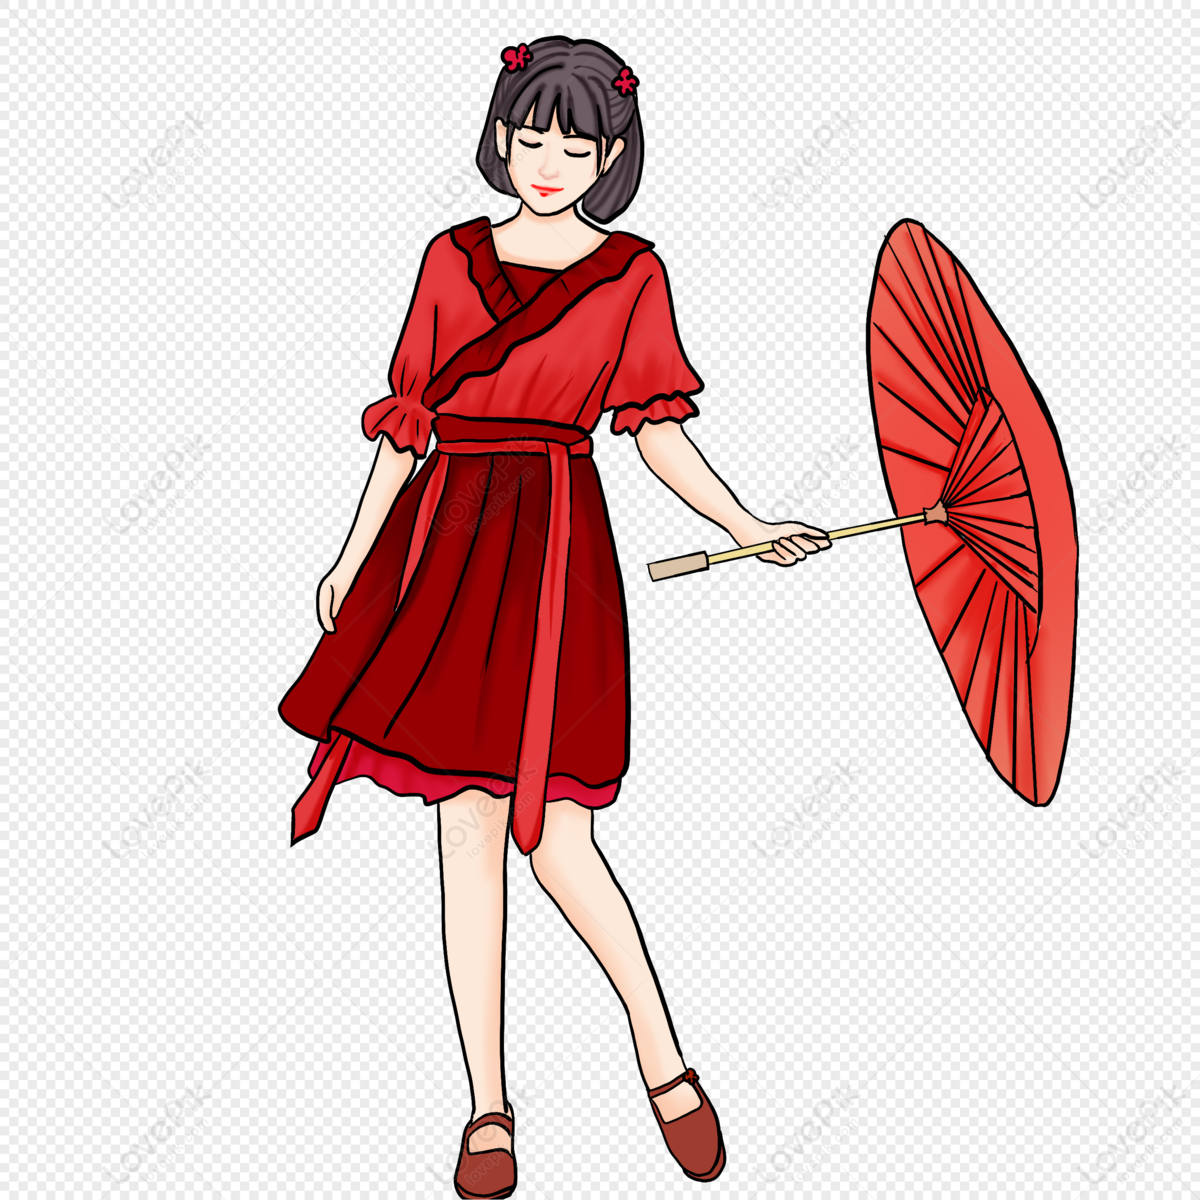 Girl Holding An Umbrella PNG Image Free Download And Clipart Image For ...